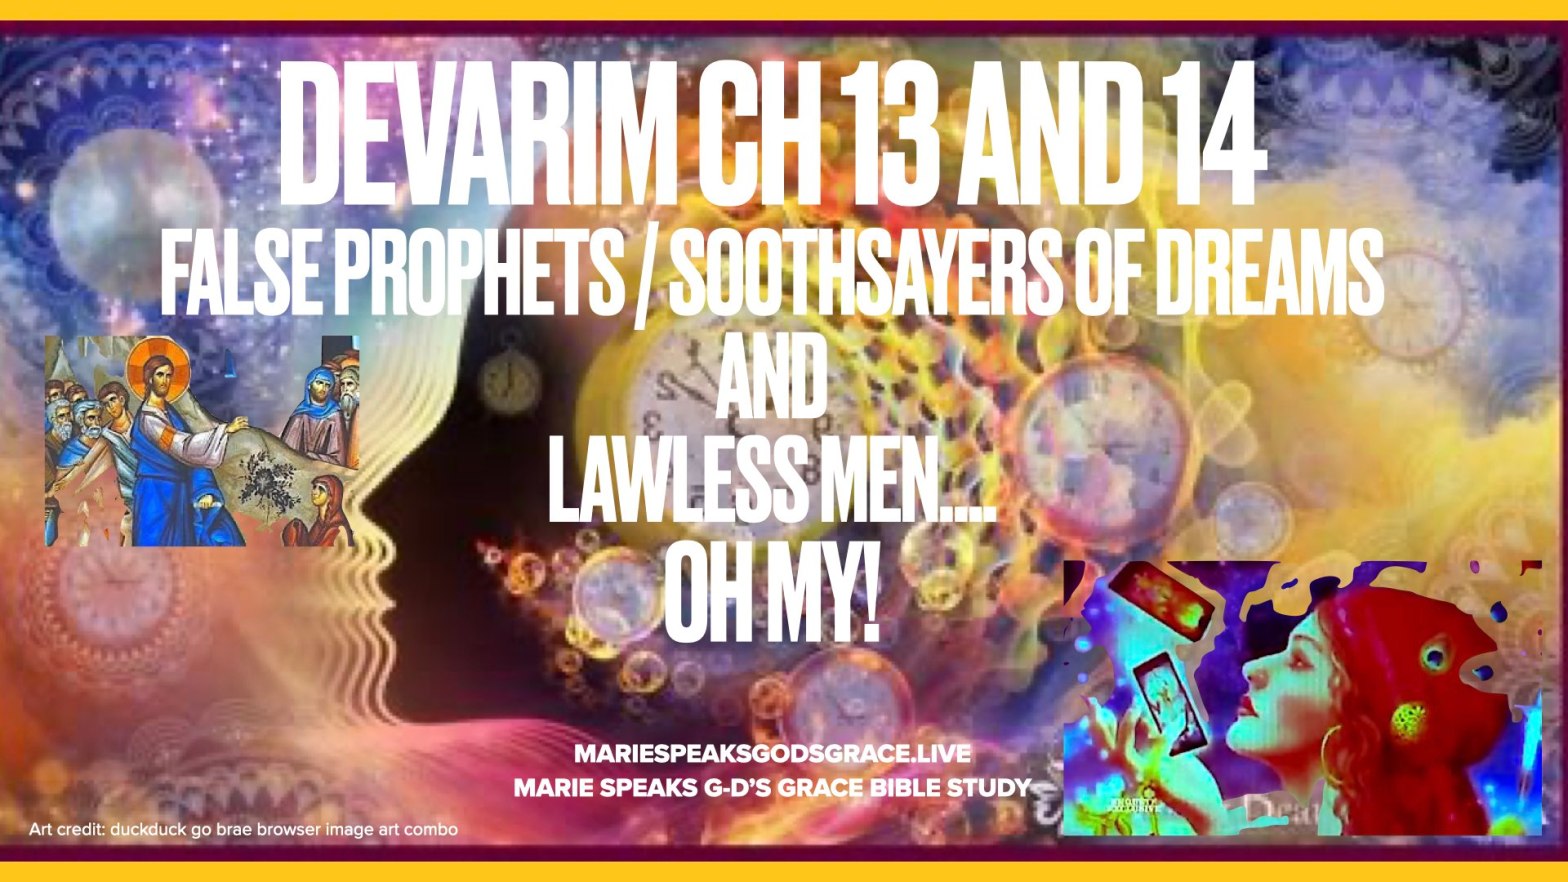 Devarim 13 and 14 False Prophets / Soothsayers of Dreams and Lawless Men… Oh my!